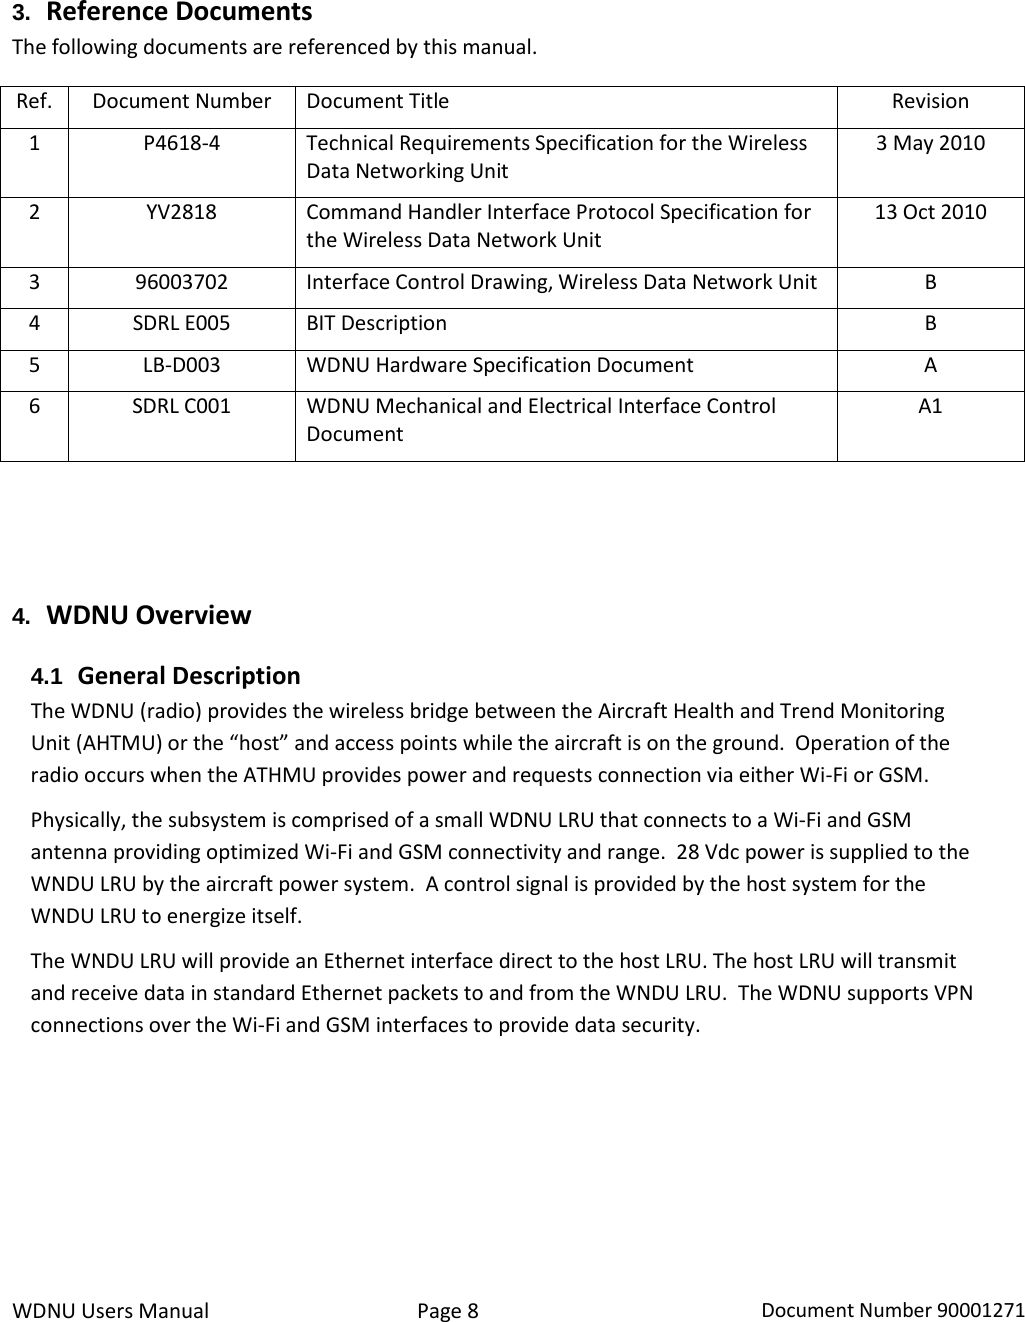 WDNU Users Manual Page 8 Document Number 90001271  3. Reference Documents The following documents are referenced by this manual. Ref. Document Number Document Title Revision 1 P4618-4 Technical Requirements Specification for the Wireless Data Networking Unit 3 May 2010 2 YV2818 Command Handler Interface Protocol Specification for the Wireless Data Network Unit 13 Oct 2010 3 96003702 Interface Control Drawing, Wireless Data Network Unit B 4 SDRL E005 BIT Description B 5 LB-D003 WDNU Hardware Specification Document A 6 SDRL C001 WDNU Mechanical and Electrical Interface Control Document A1   4. WDNU Overview 4.1 General Description The WDNU (radio) provides the wireless bridge between the Aircraft Health and Trend Monitoring Unit (AHTMU) or the “host” and access points while the aircraft is on the ground.  Operation of the radio occurs when the ATHMU provides power and requests connection via either Wi-Fi or GSM.     Physically, the subsystem is comprised of a small WDNU LRU that connects to a Wi-Fi and GSM antenna providing optimized Wi-Fi and GSM connectivity and range.  28 Vdc power is supplied to the WNDU LRU by the aircraft power system.  A control signal is provided by the host system for the WNDU LRU to energize itself. The WNDU LRU will provide an Ethernet interface direct to the host LRU. The host LRU will transmit and receive data in standard Ethernet packets to and from the WNDU LRU.  The WDNU supports VPN connections over the Wi-Fi and GSM interfaces to provide data security.      